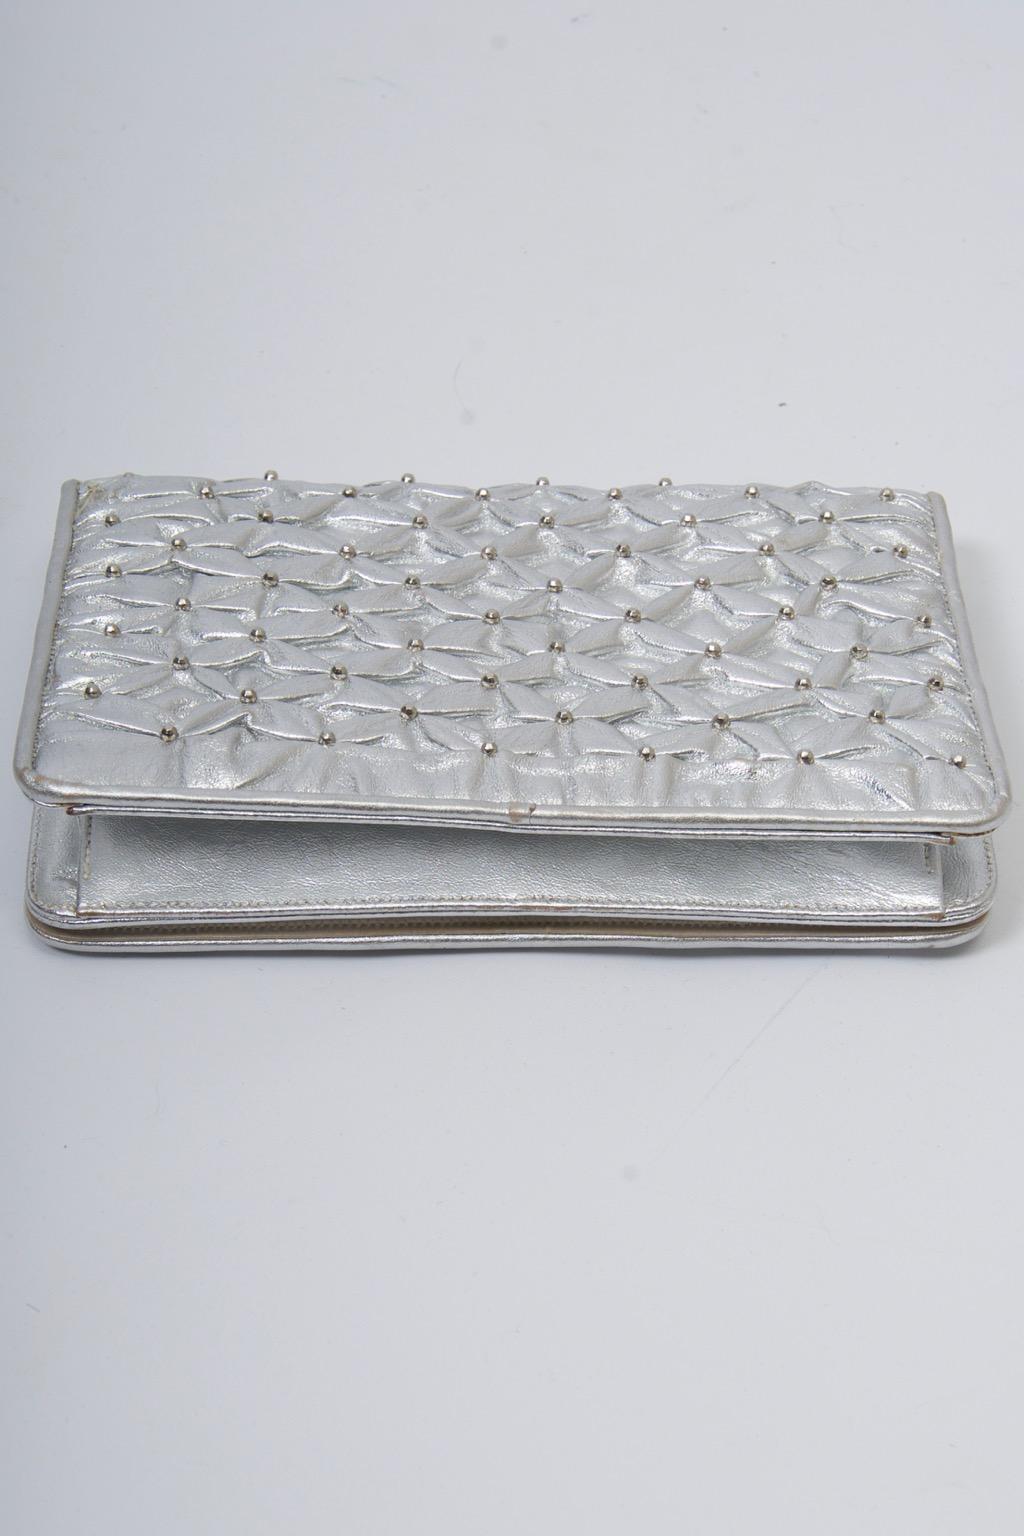 Women's MM Silver Convertible Clutch For Sale